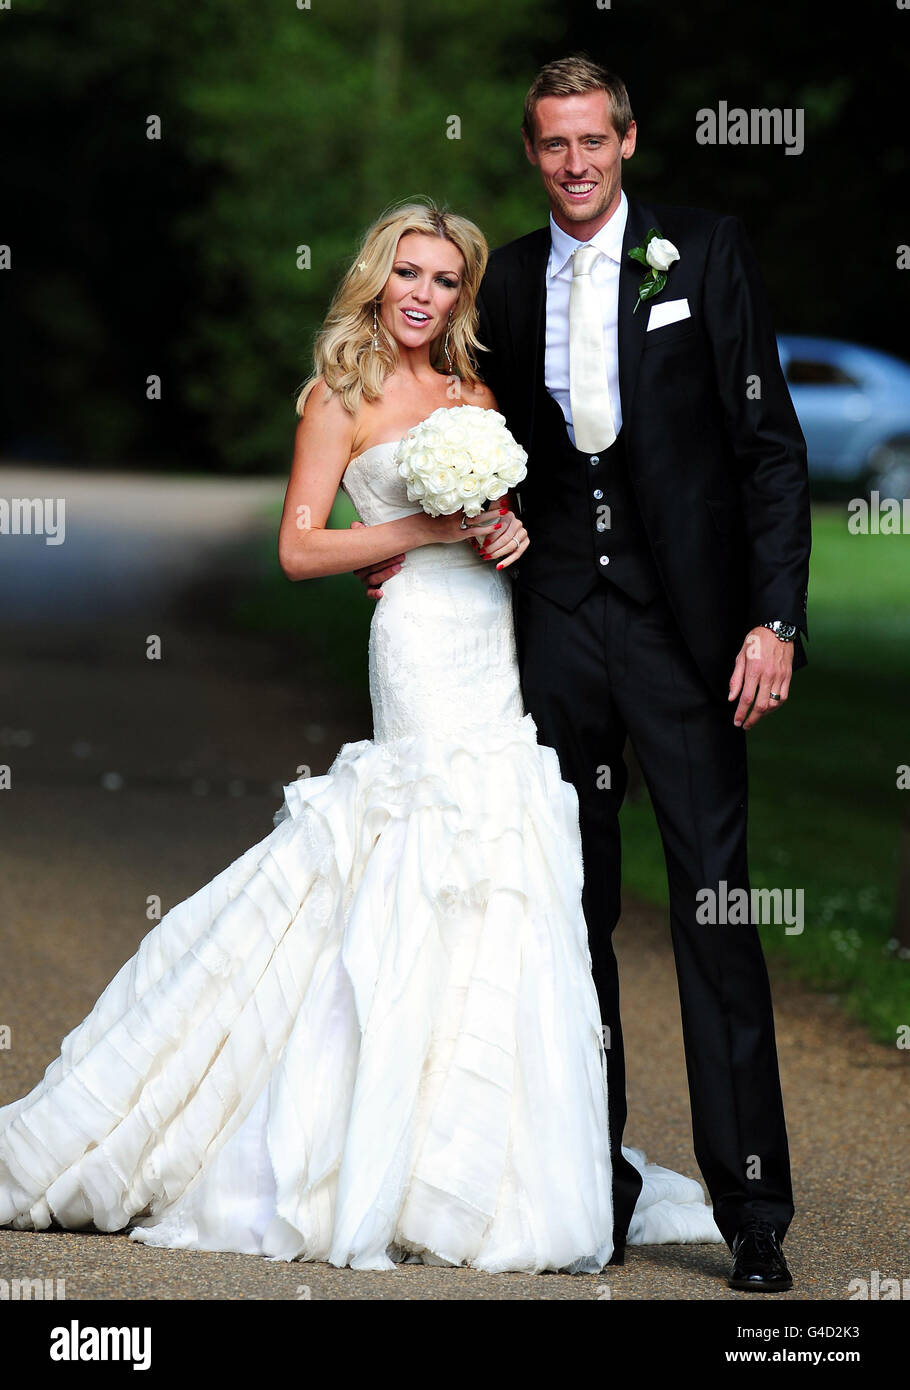 Peter Crouch and Abbey Clancy wedding Stock Photo